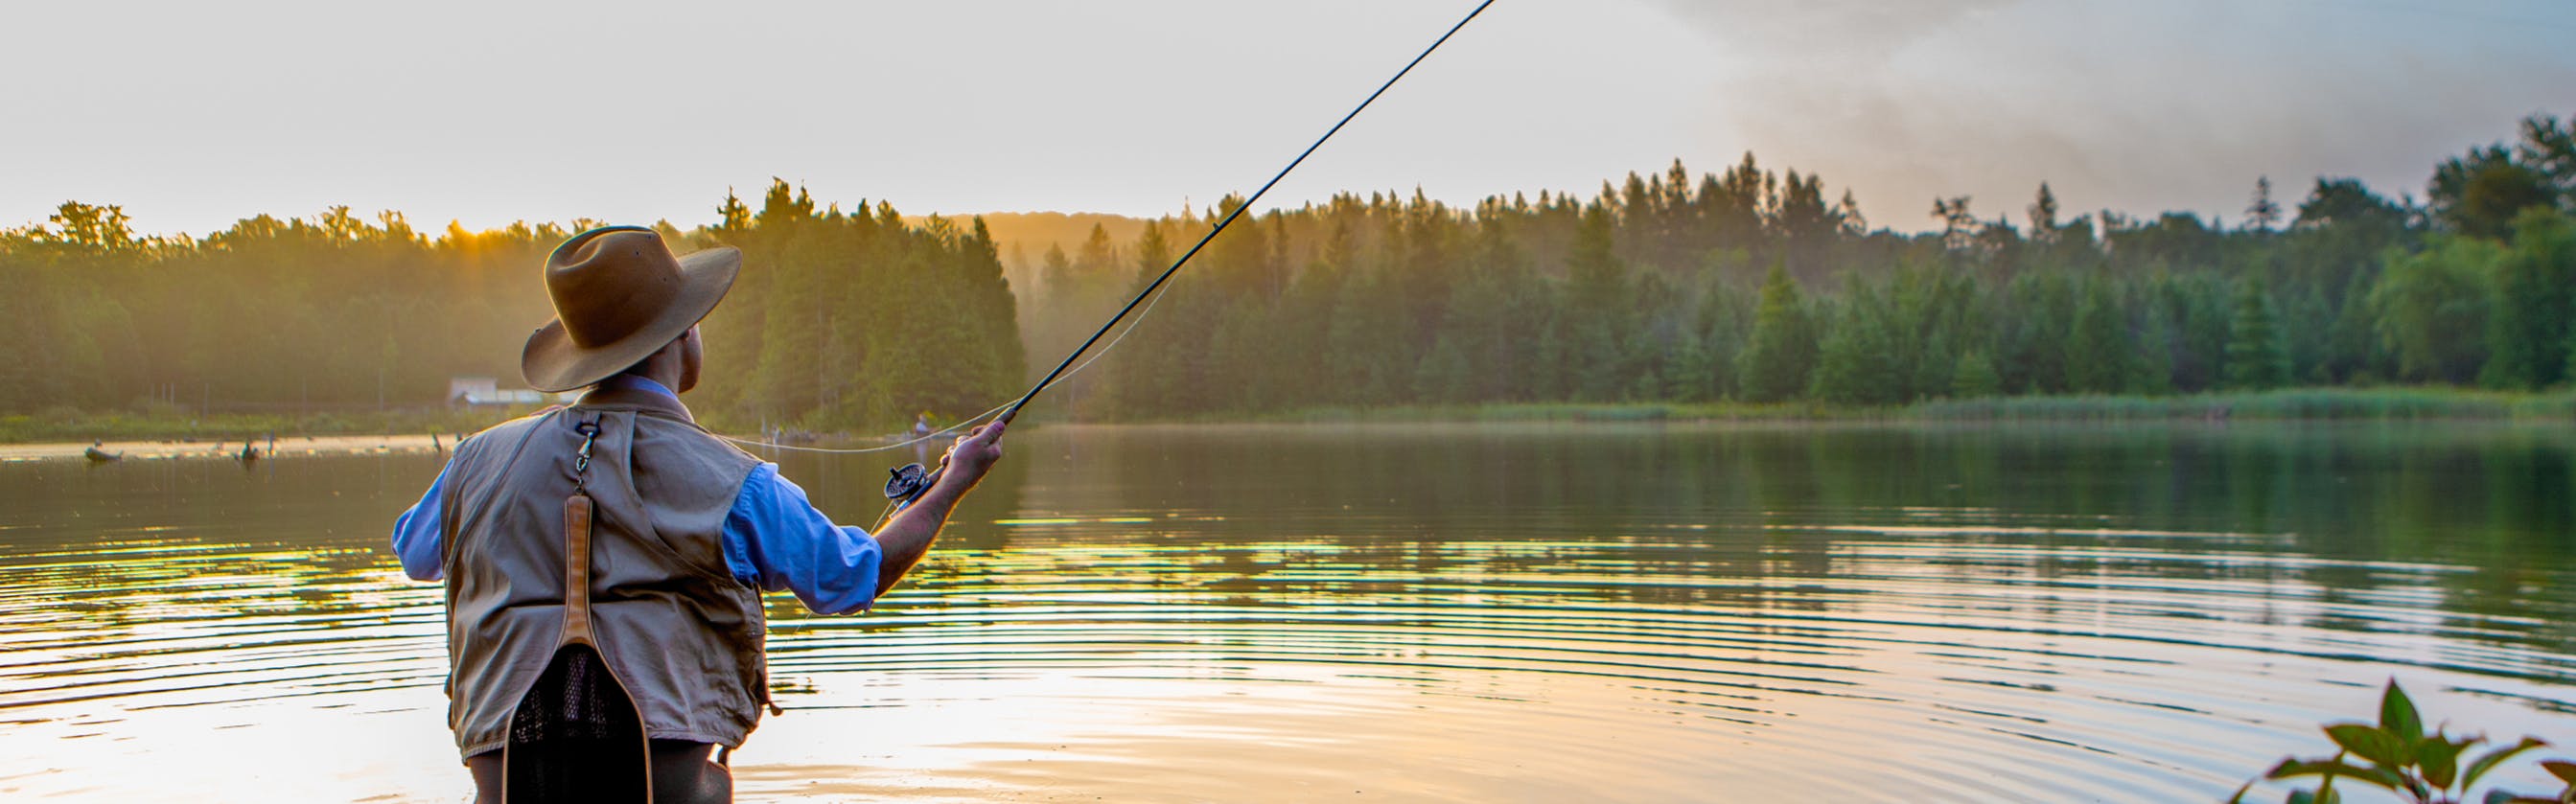 An Expert Guide to Fly Fishing for Northern Pike